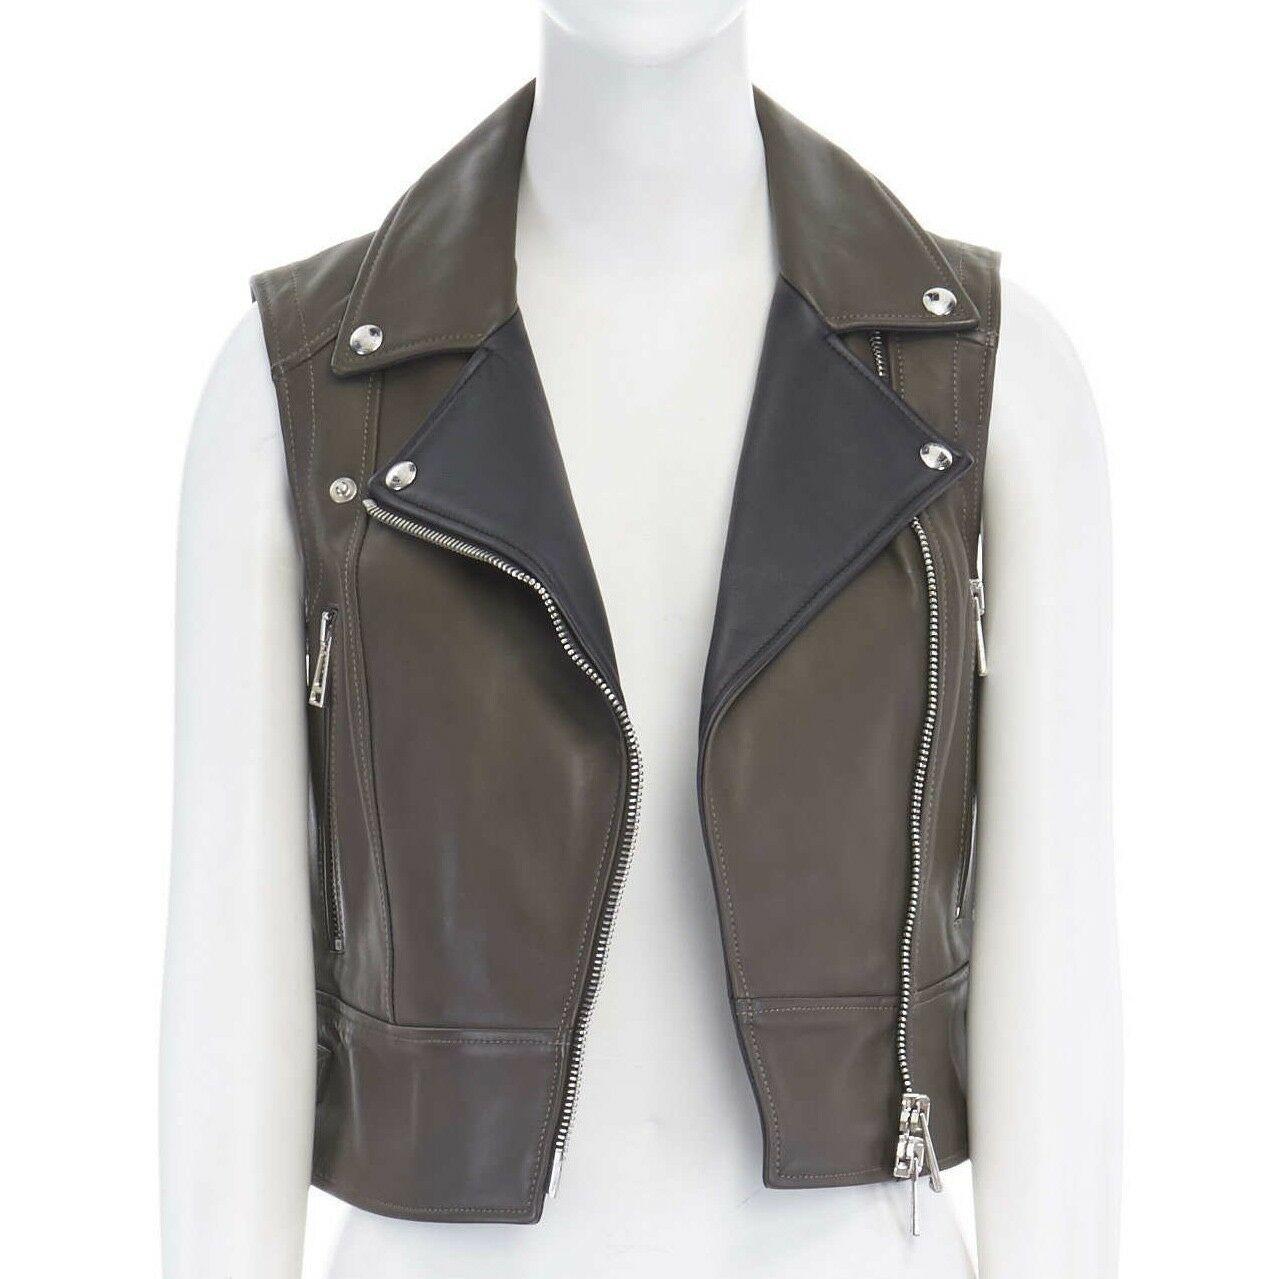 BELSTAFF khaki green black leather silver hardware biker vest FR36 US2 XS
BELSTAFF
Khaki green leather . 
Contrast black leather lining visible at foldover collar . 
Silver hardware . 
Dual zip front pocket with enlarged zipper pull signed Belstaff